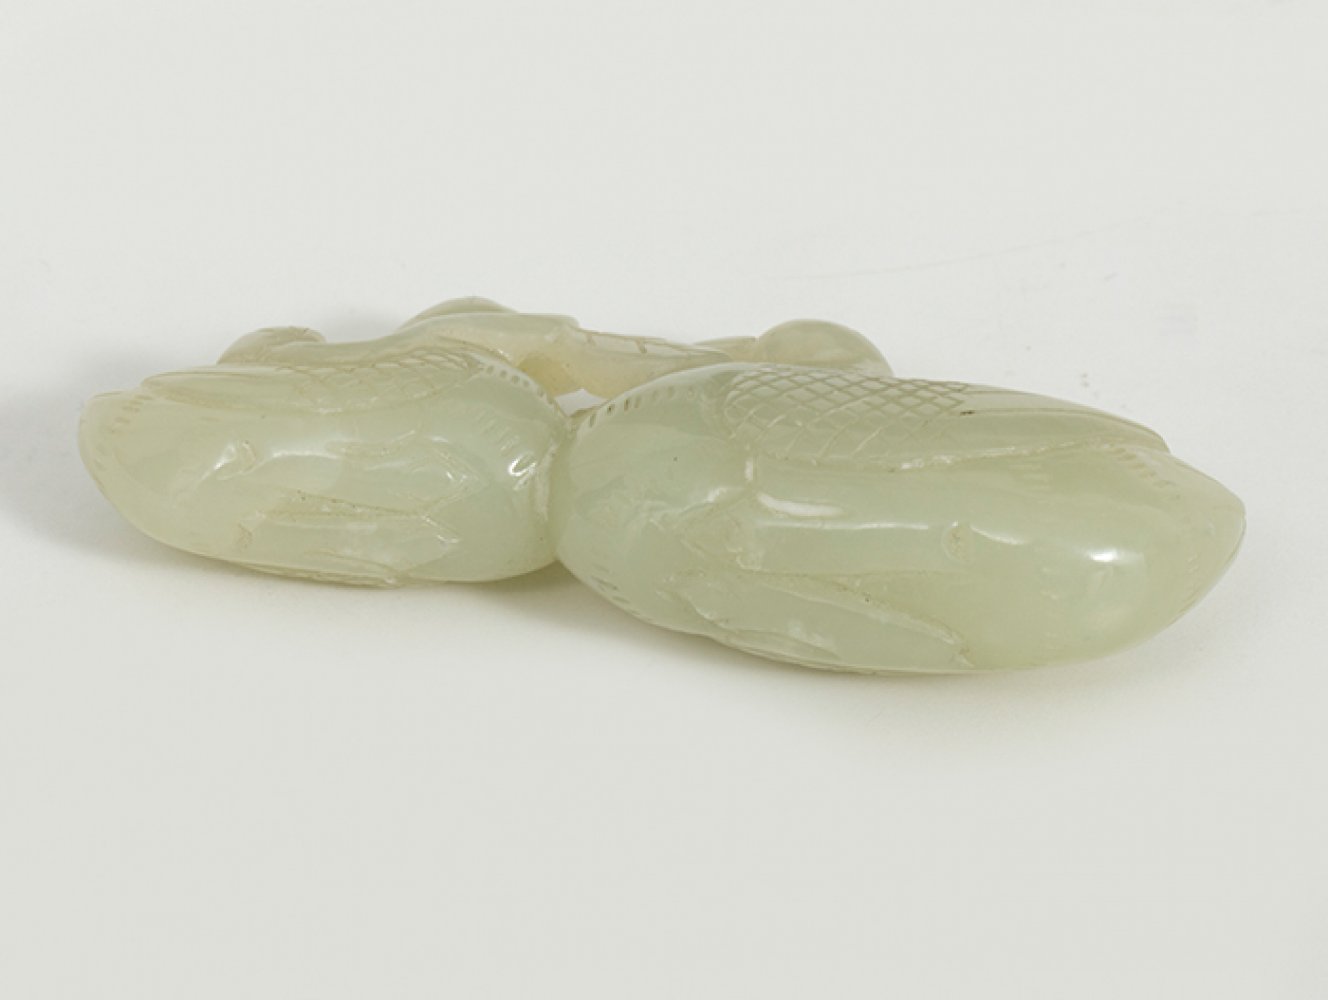 Amulet. China, Qing Dynasty, 20th century.Carved white jade.Measurements: 3.5 x 8 x 1.5 cm.Amulet - Image 3 of 3